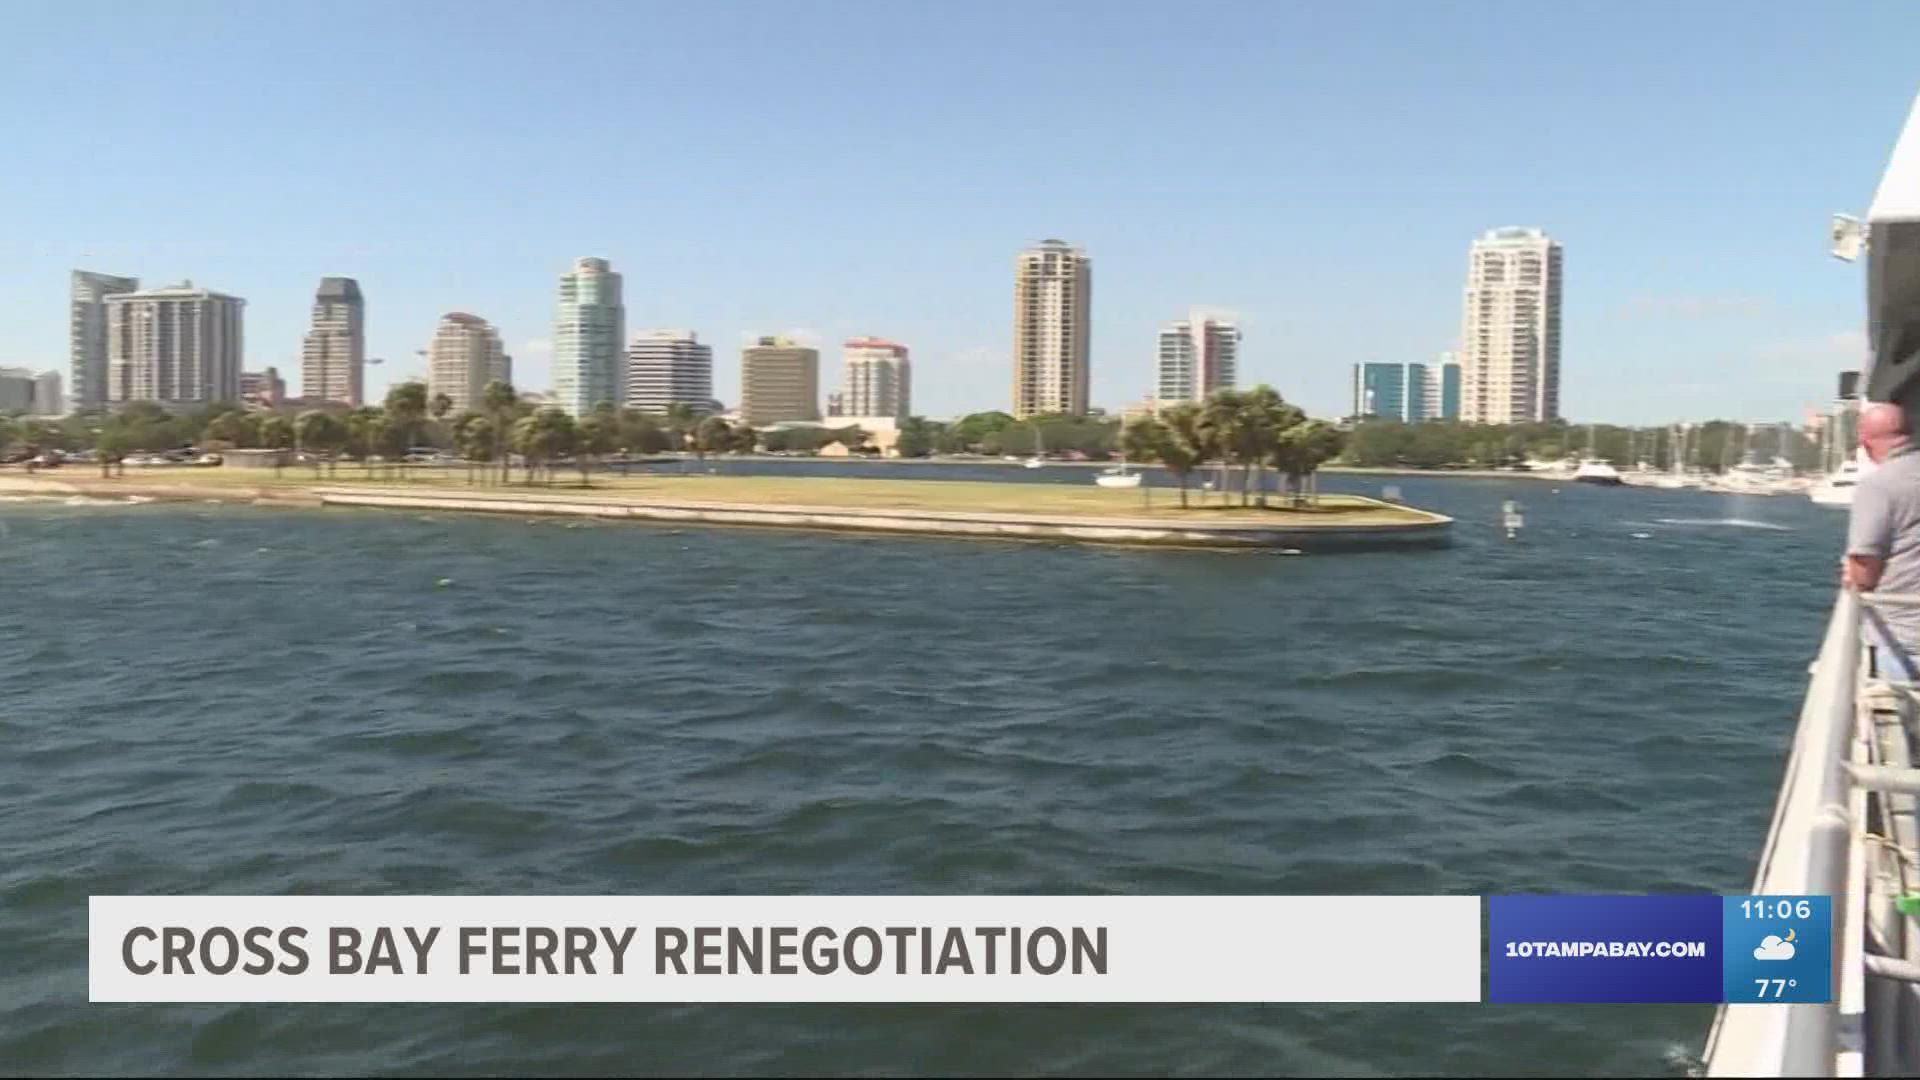 "We received a lot of emails from people that support the ferry. We support the ferry too – that’s not the question," Pinellas Co. Administrator Barry Burton said.